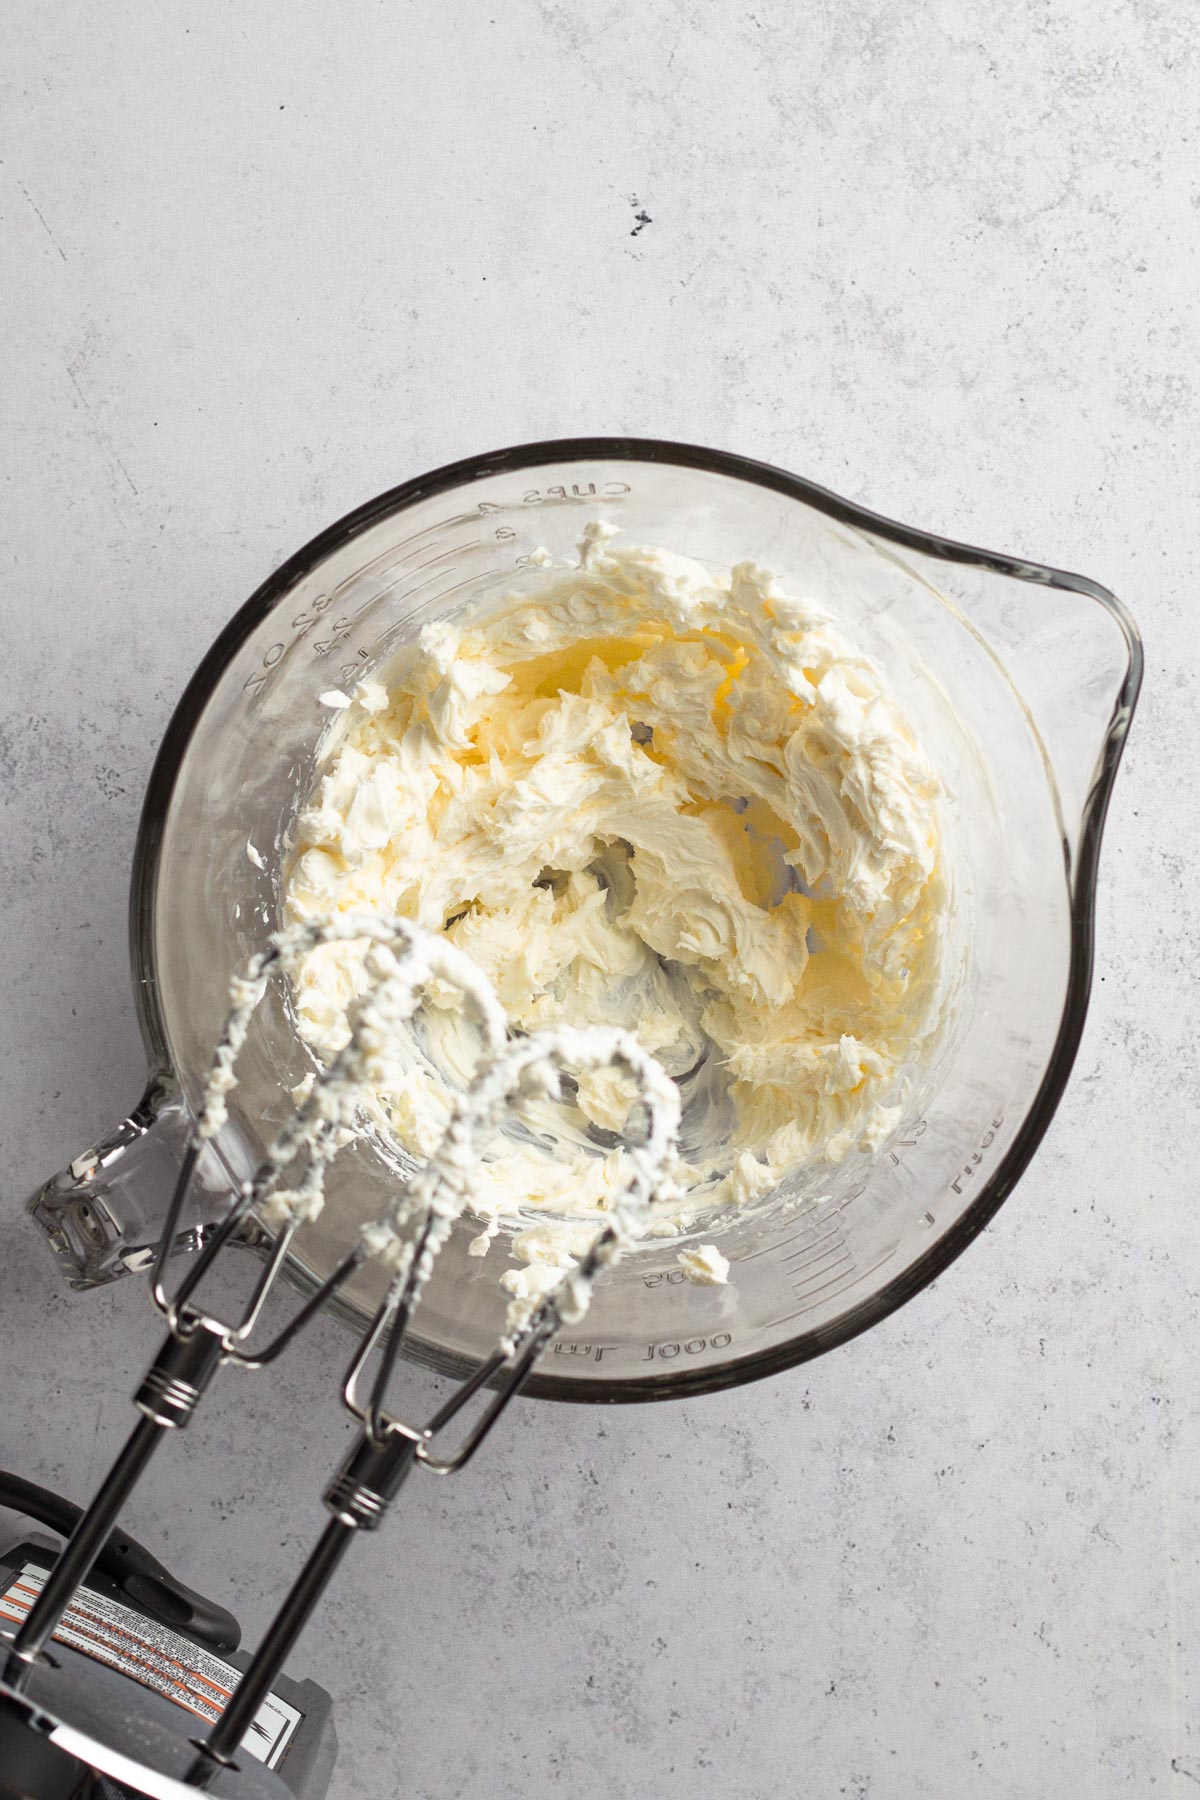 Cream cheese beaten in a glass mixing bowl.